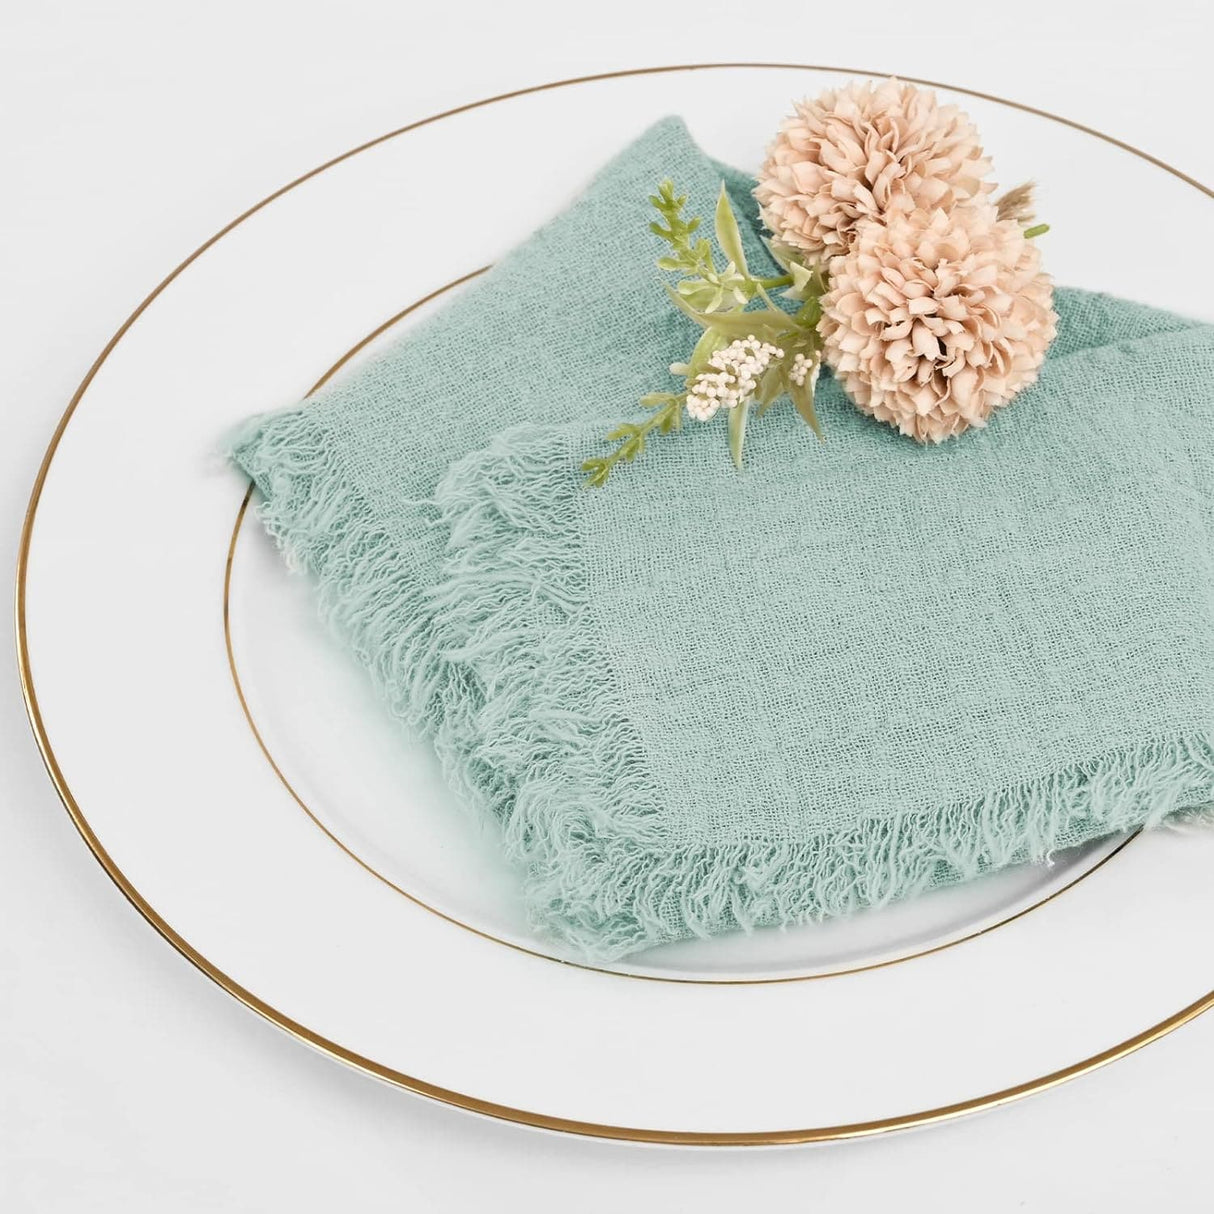 Handmade Napkins with Fringe 16x16 Inches,Set of 24 -Cotton Napkins,Delicate Handmade Cloth Napkins Rustic Dinner Napkins Decorative Table Napkins for Wedding/Dinner/Party